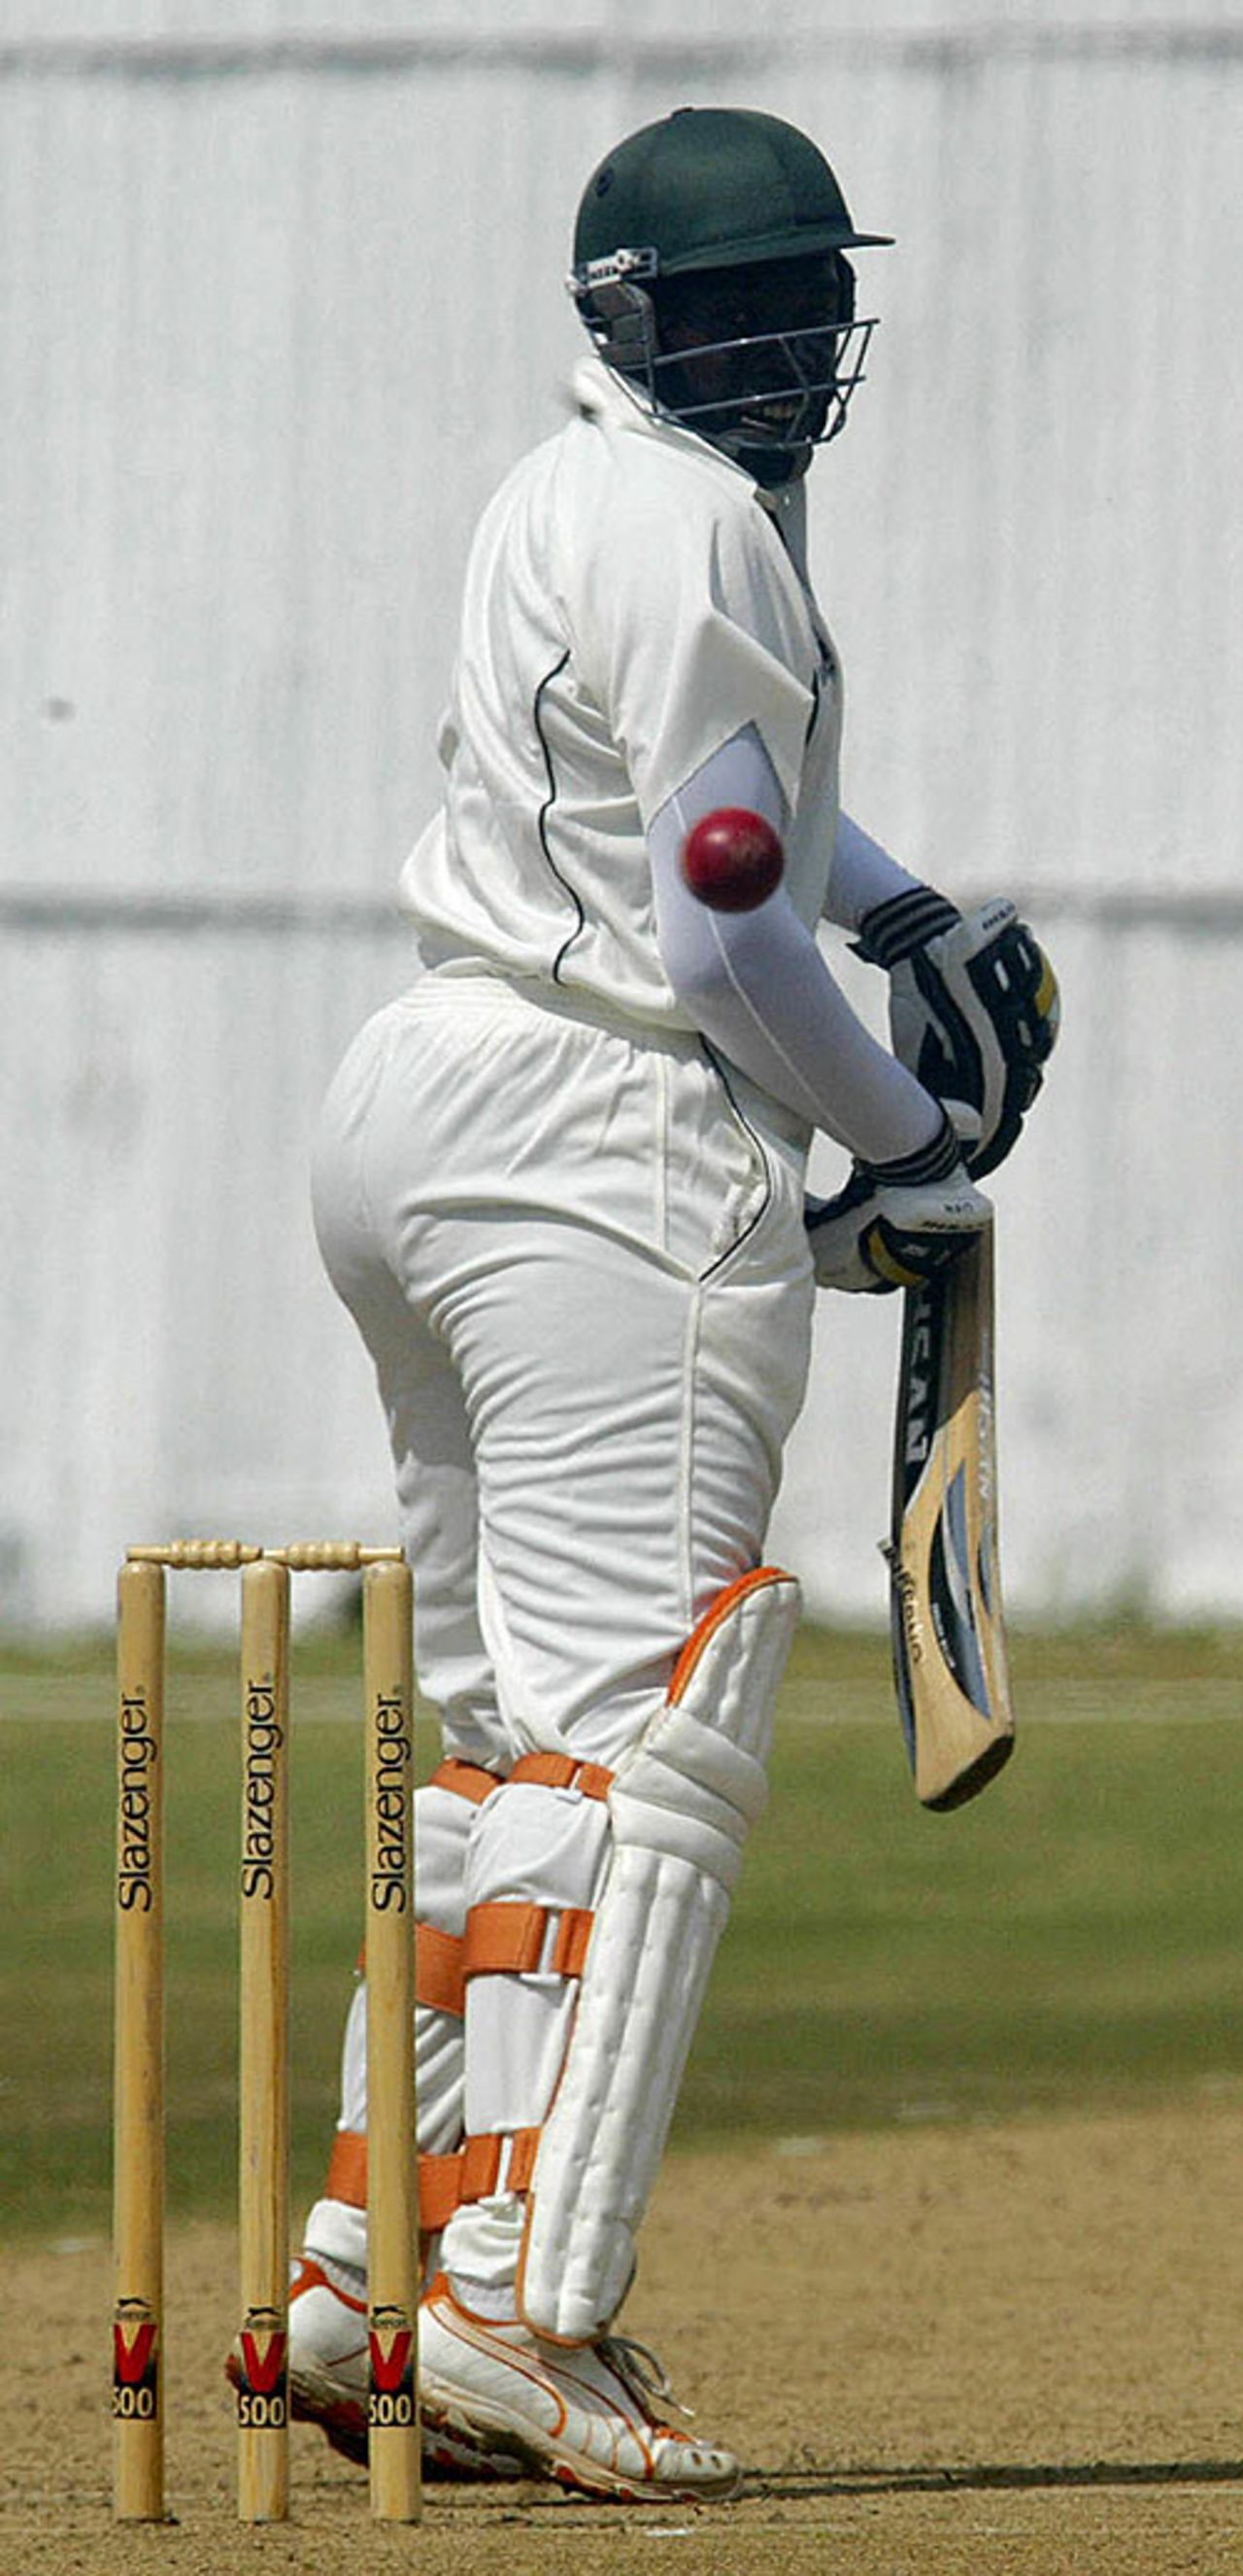 Maurice Ouma was out for a duck, Kenya v India A, 1st match, Mombasa, 1st day, August 5, 2007